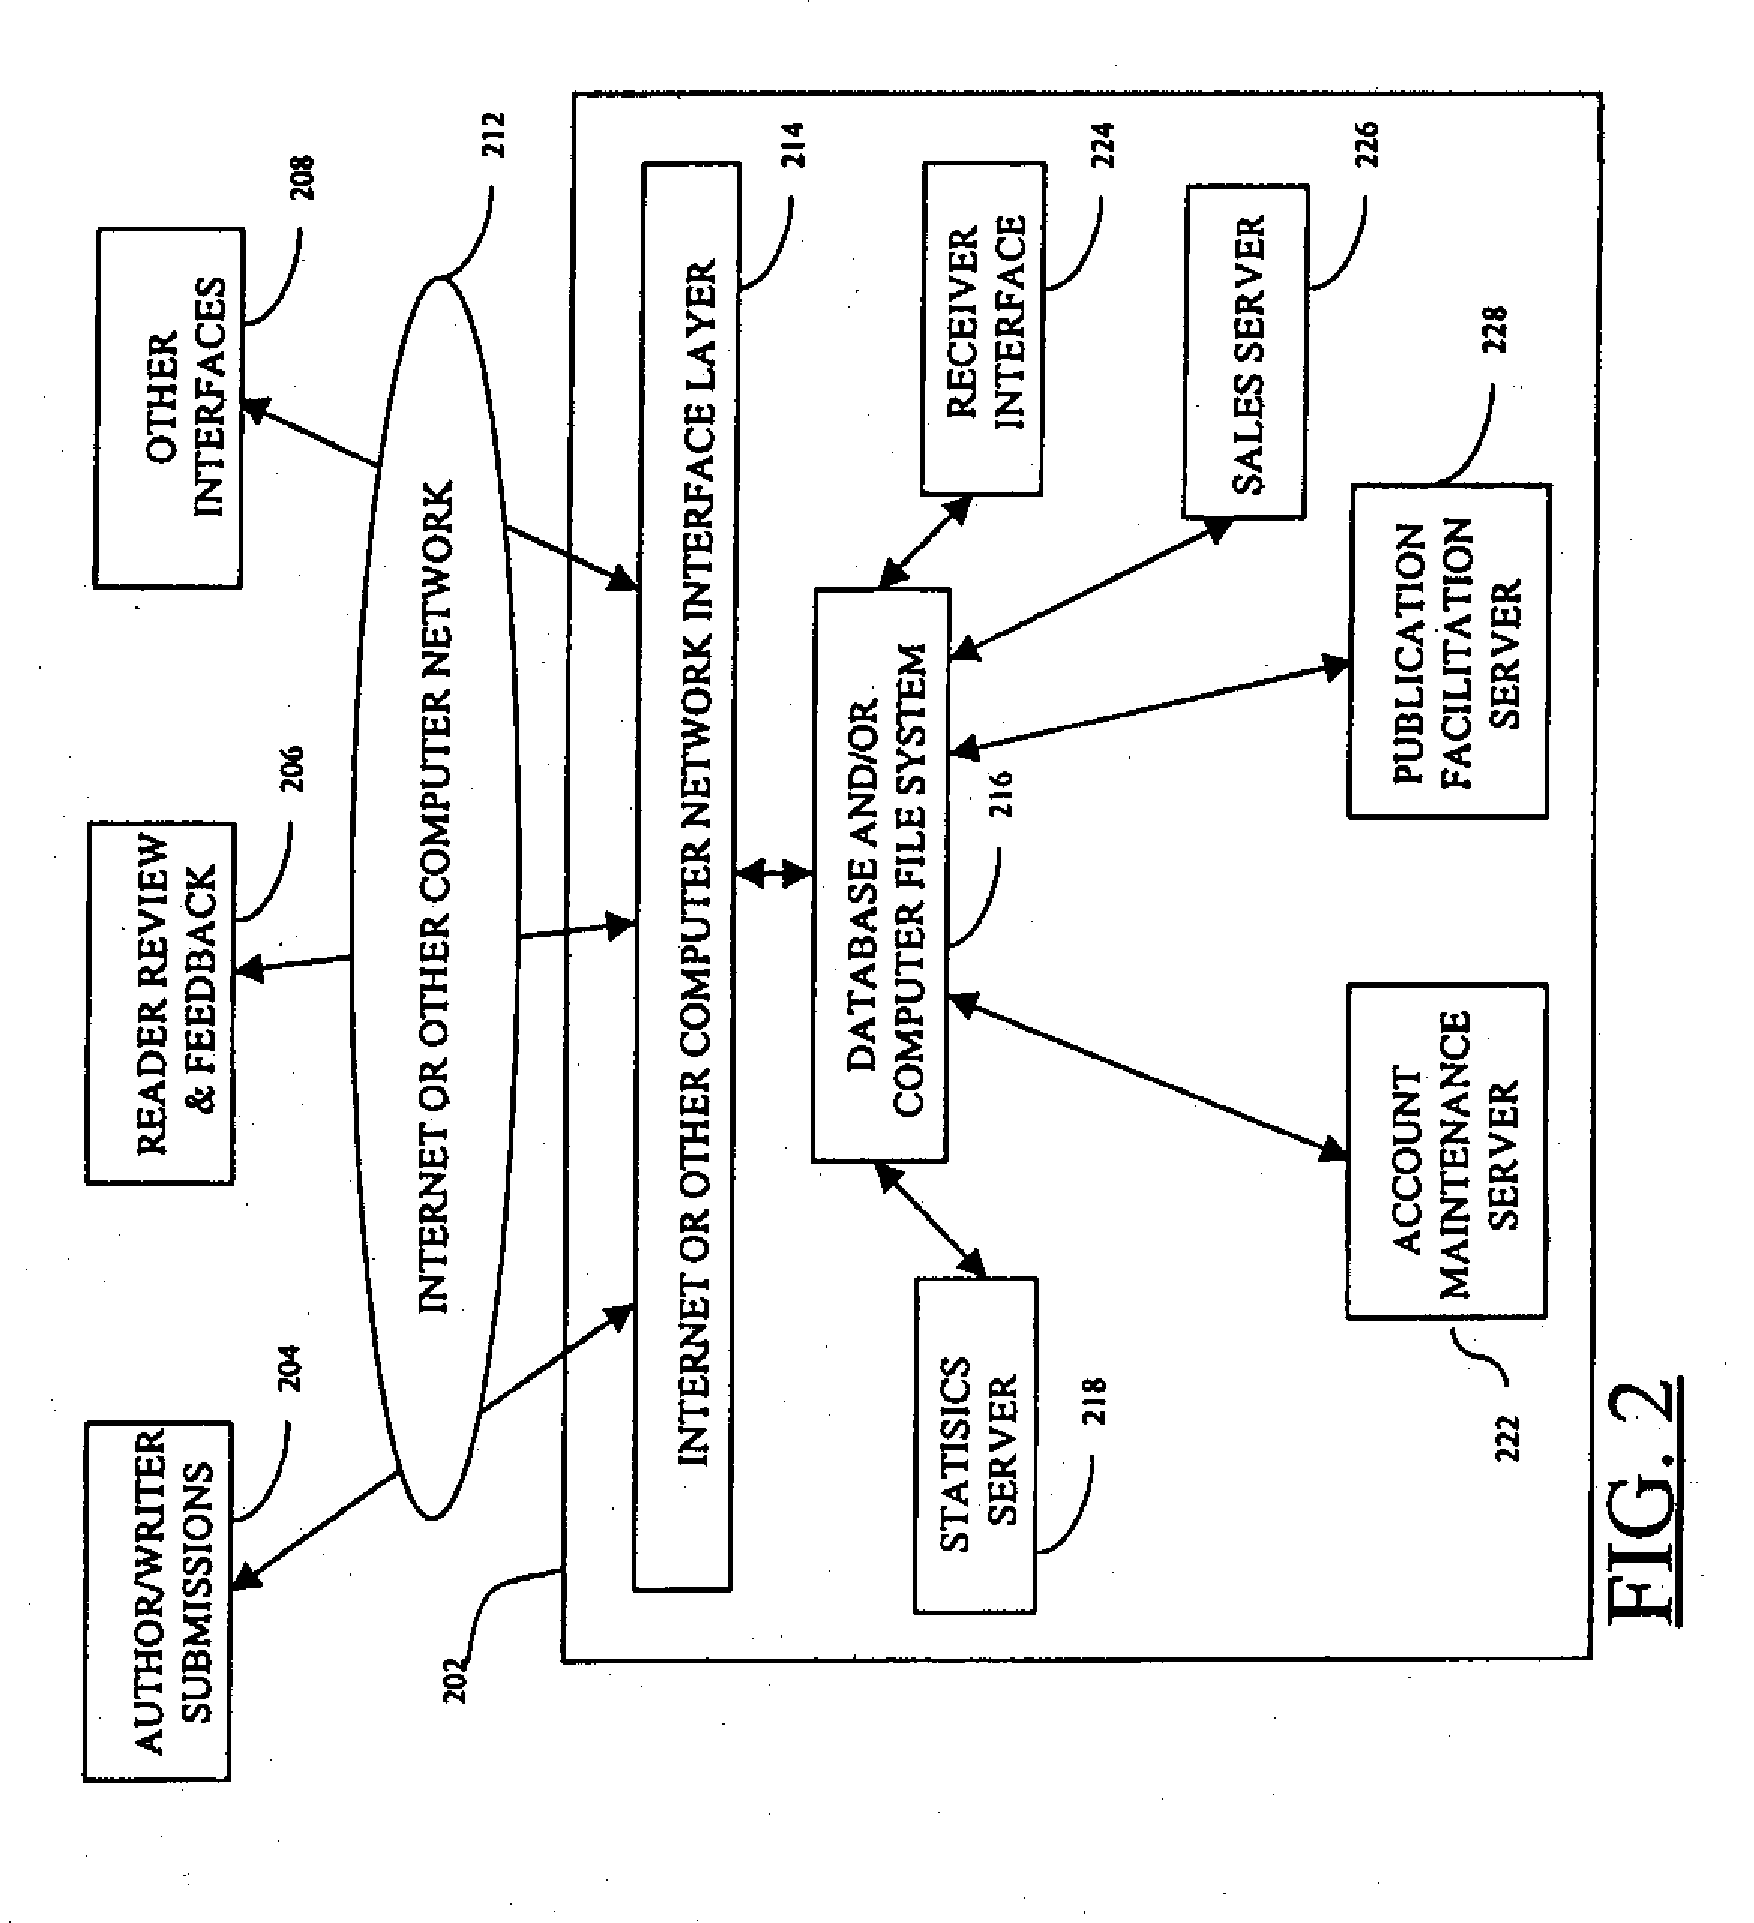 System and method for automated, reader-based filtration of literary works at internet-related submission site